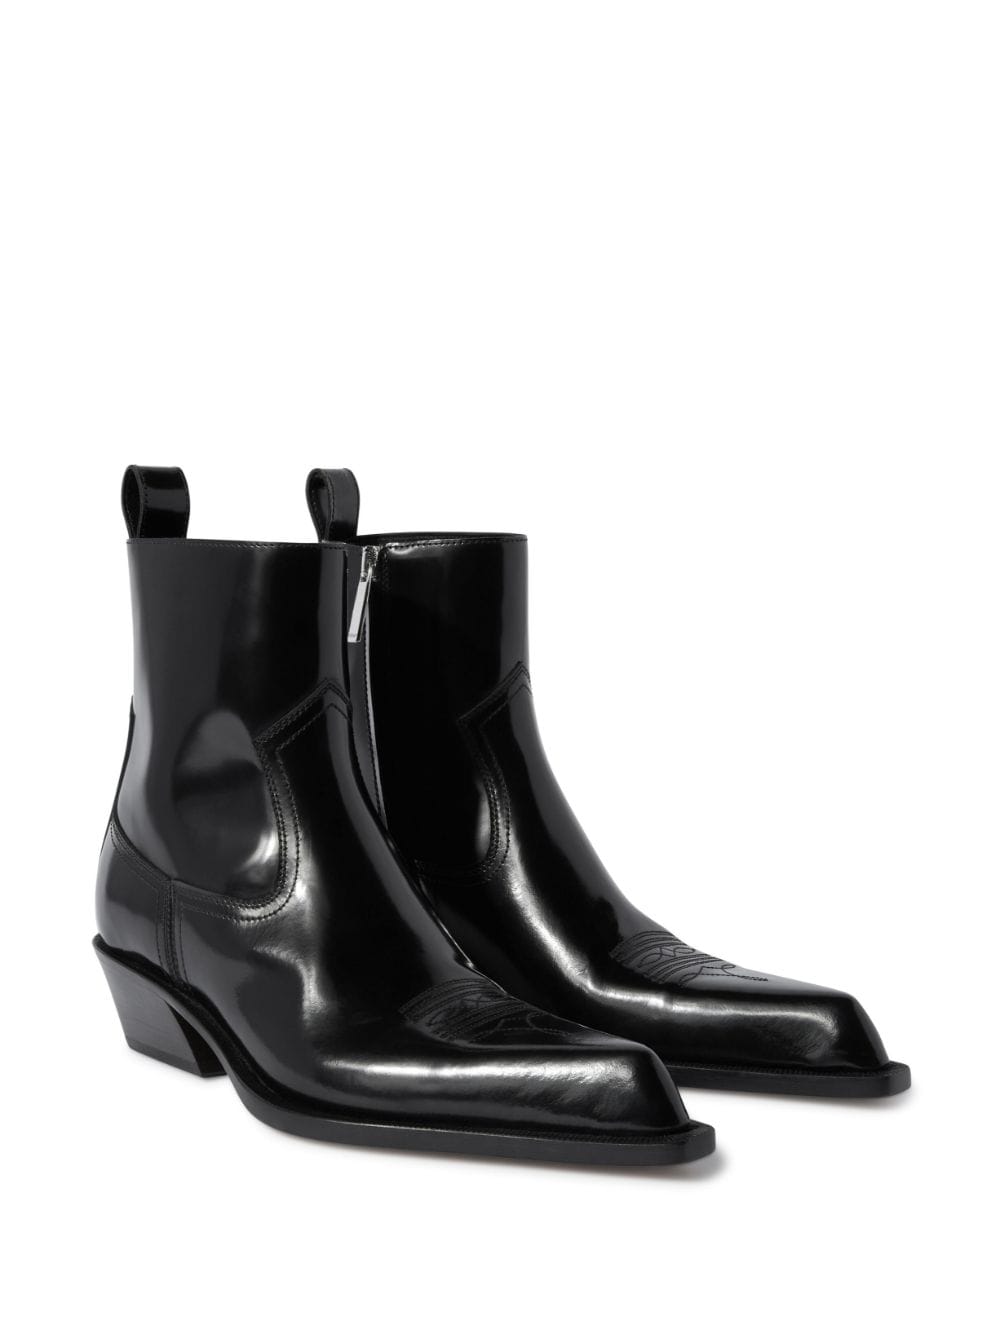 Off-White Western Blade Ankle Boots - Farfetch